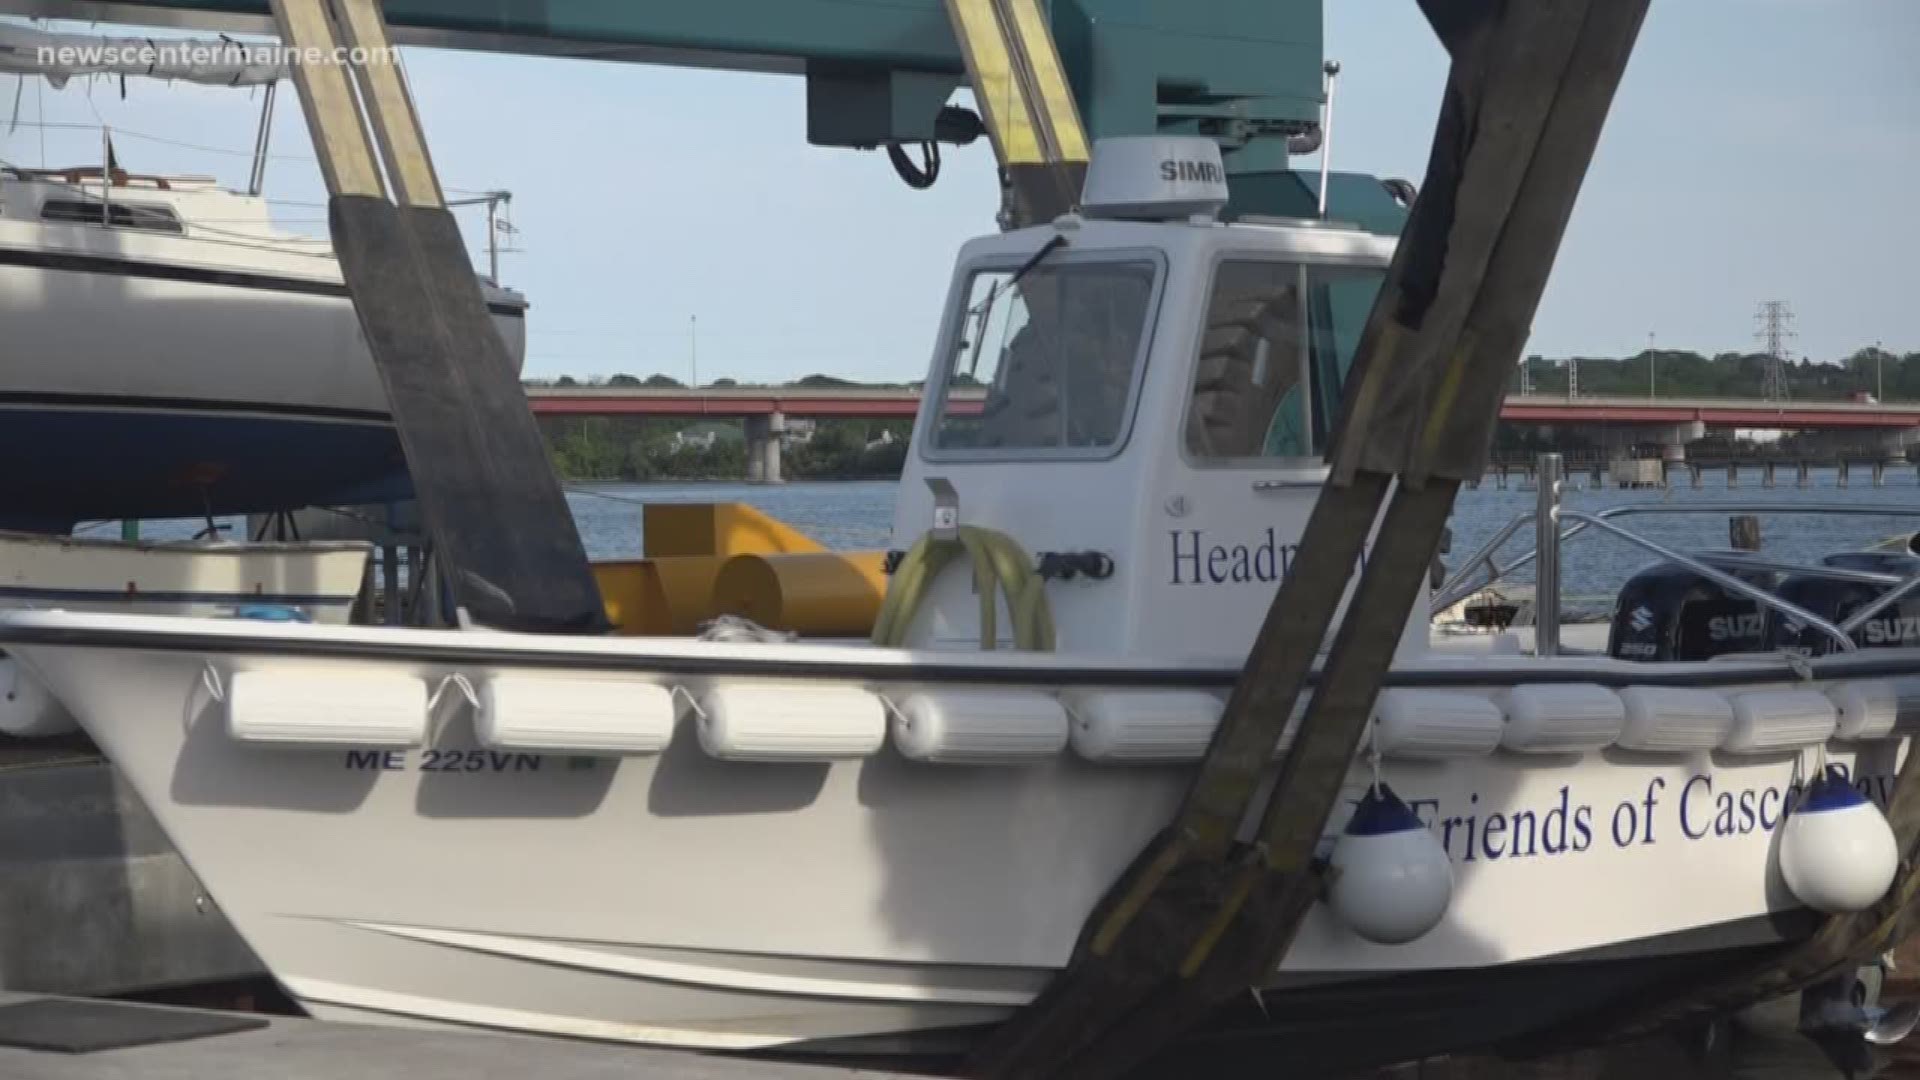 The Headmaster puts a cheeky name on the new pump-out boat's mission to clean up sewage from Casco Bay.